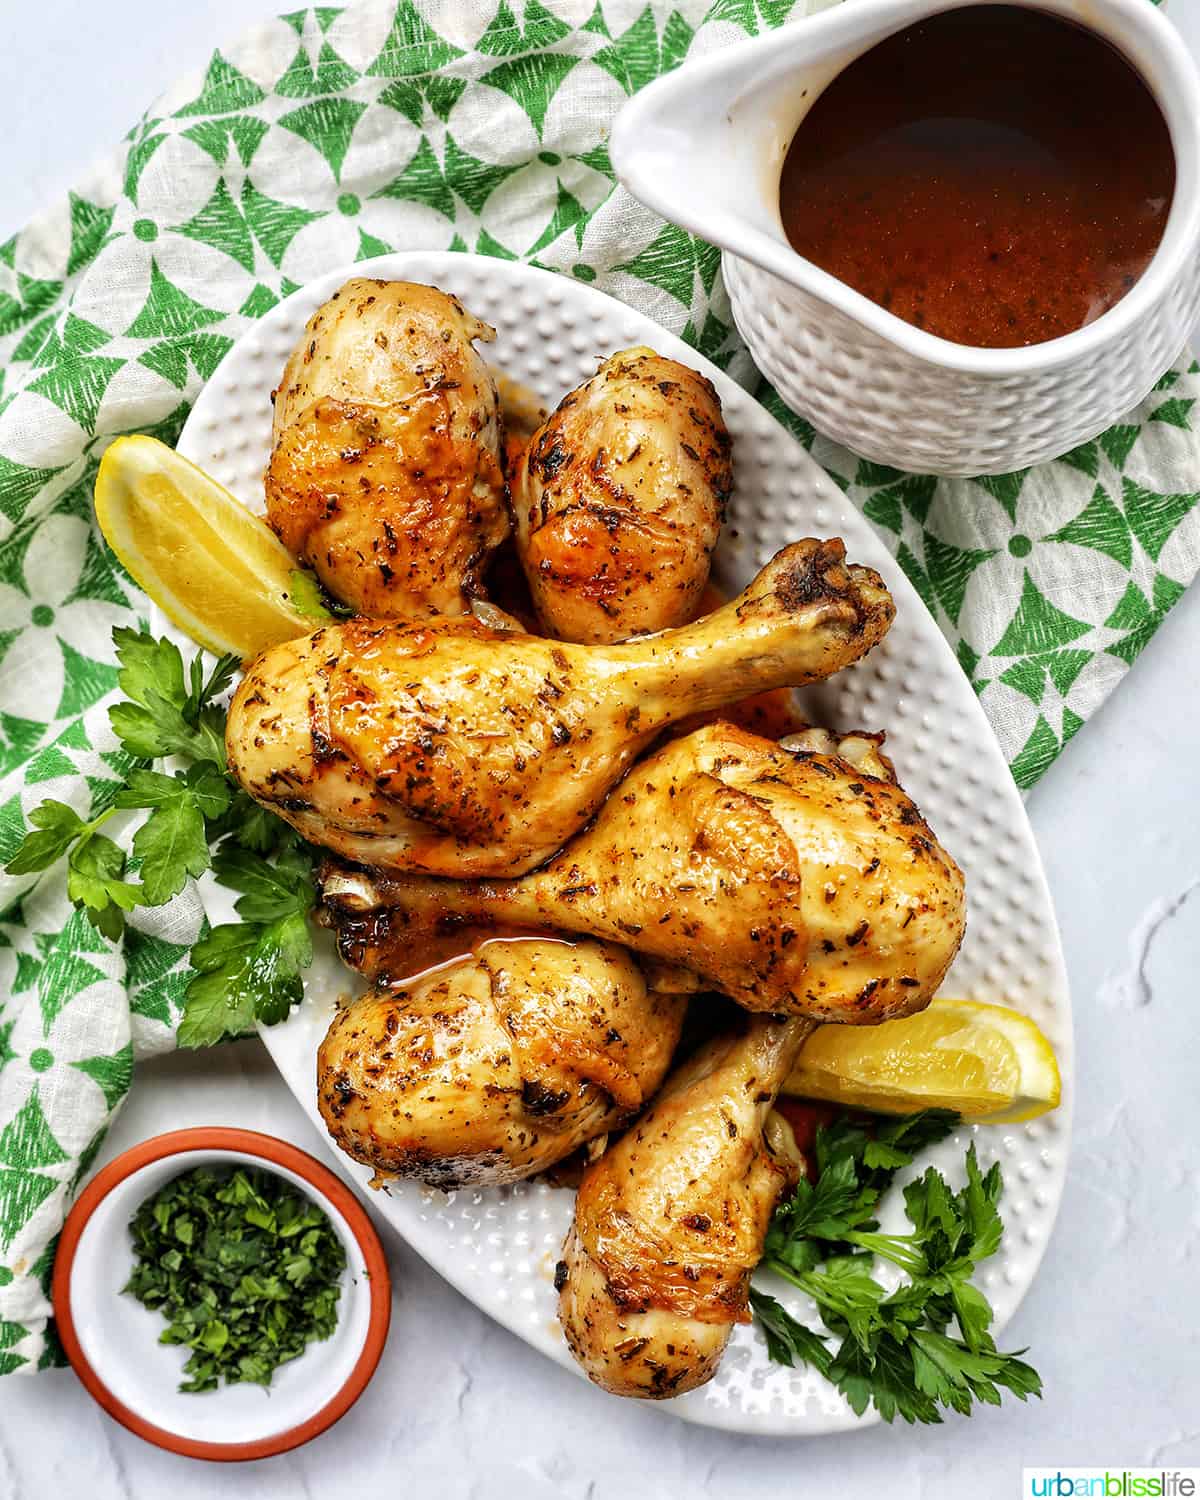 Stack of chicken drumsticks with seasoning and garnished with parsley and side of lemon wedges on bed of herbs and side of gravy.